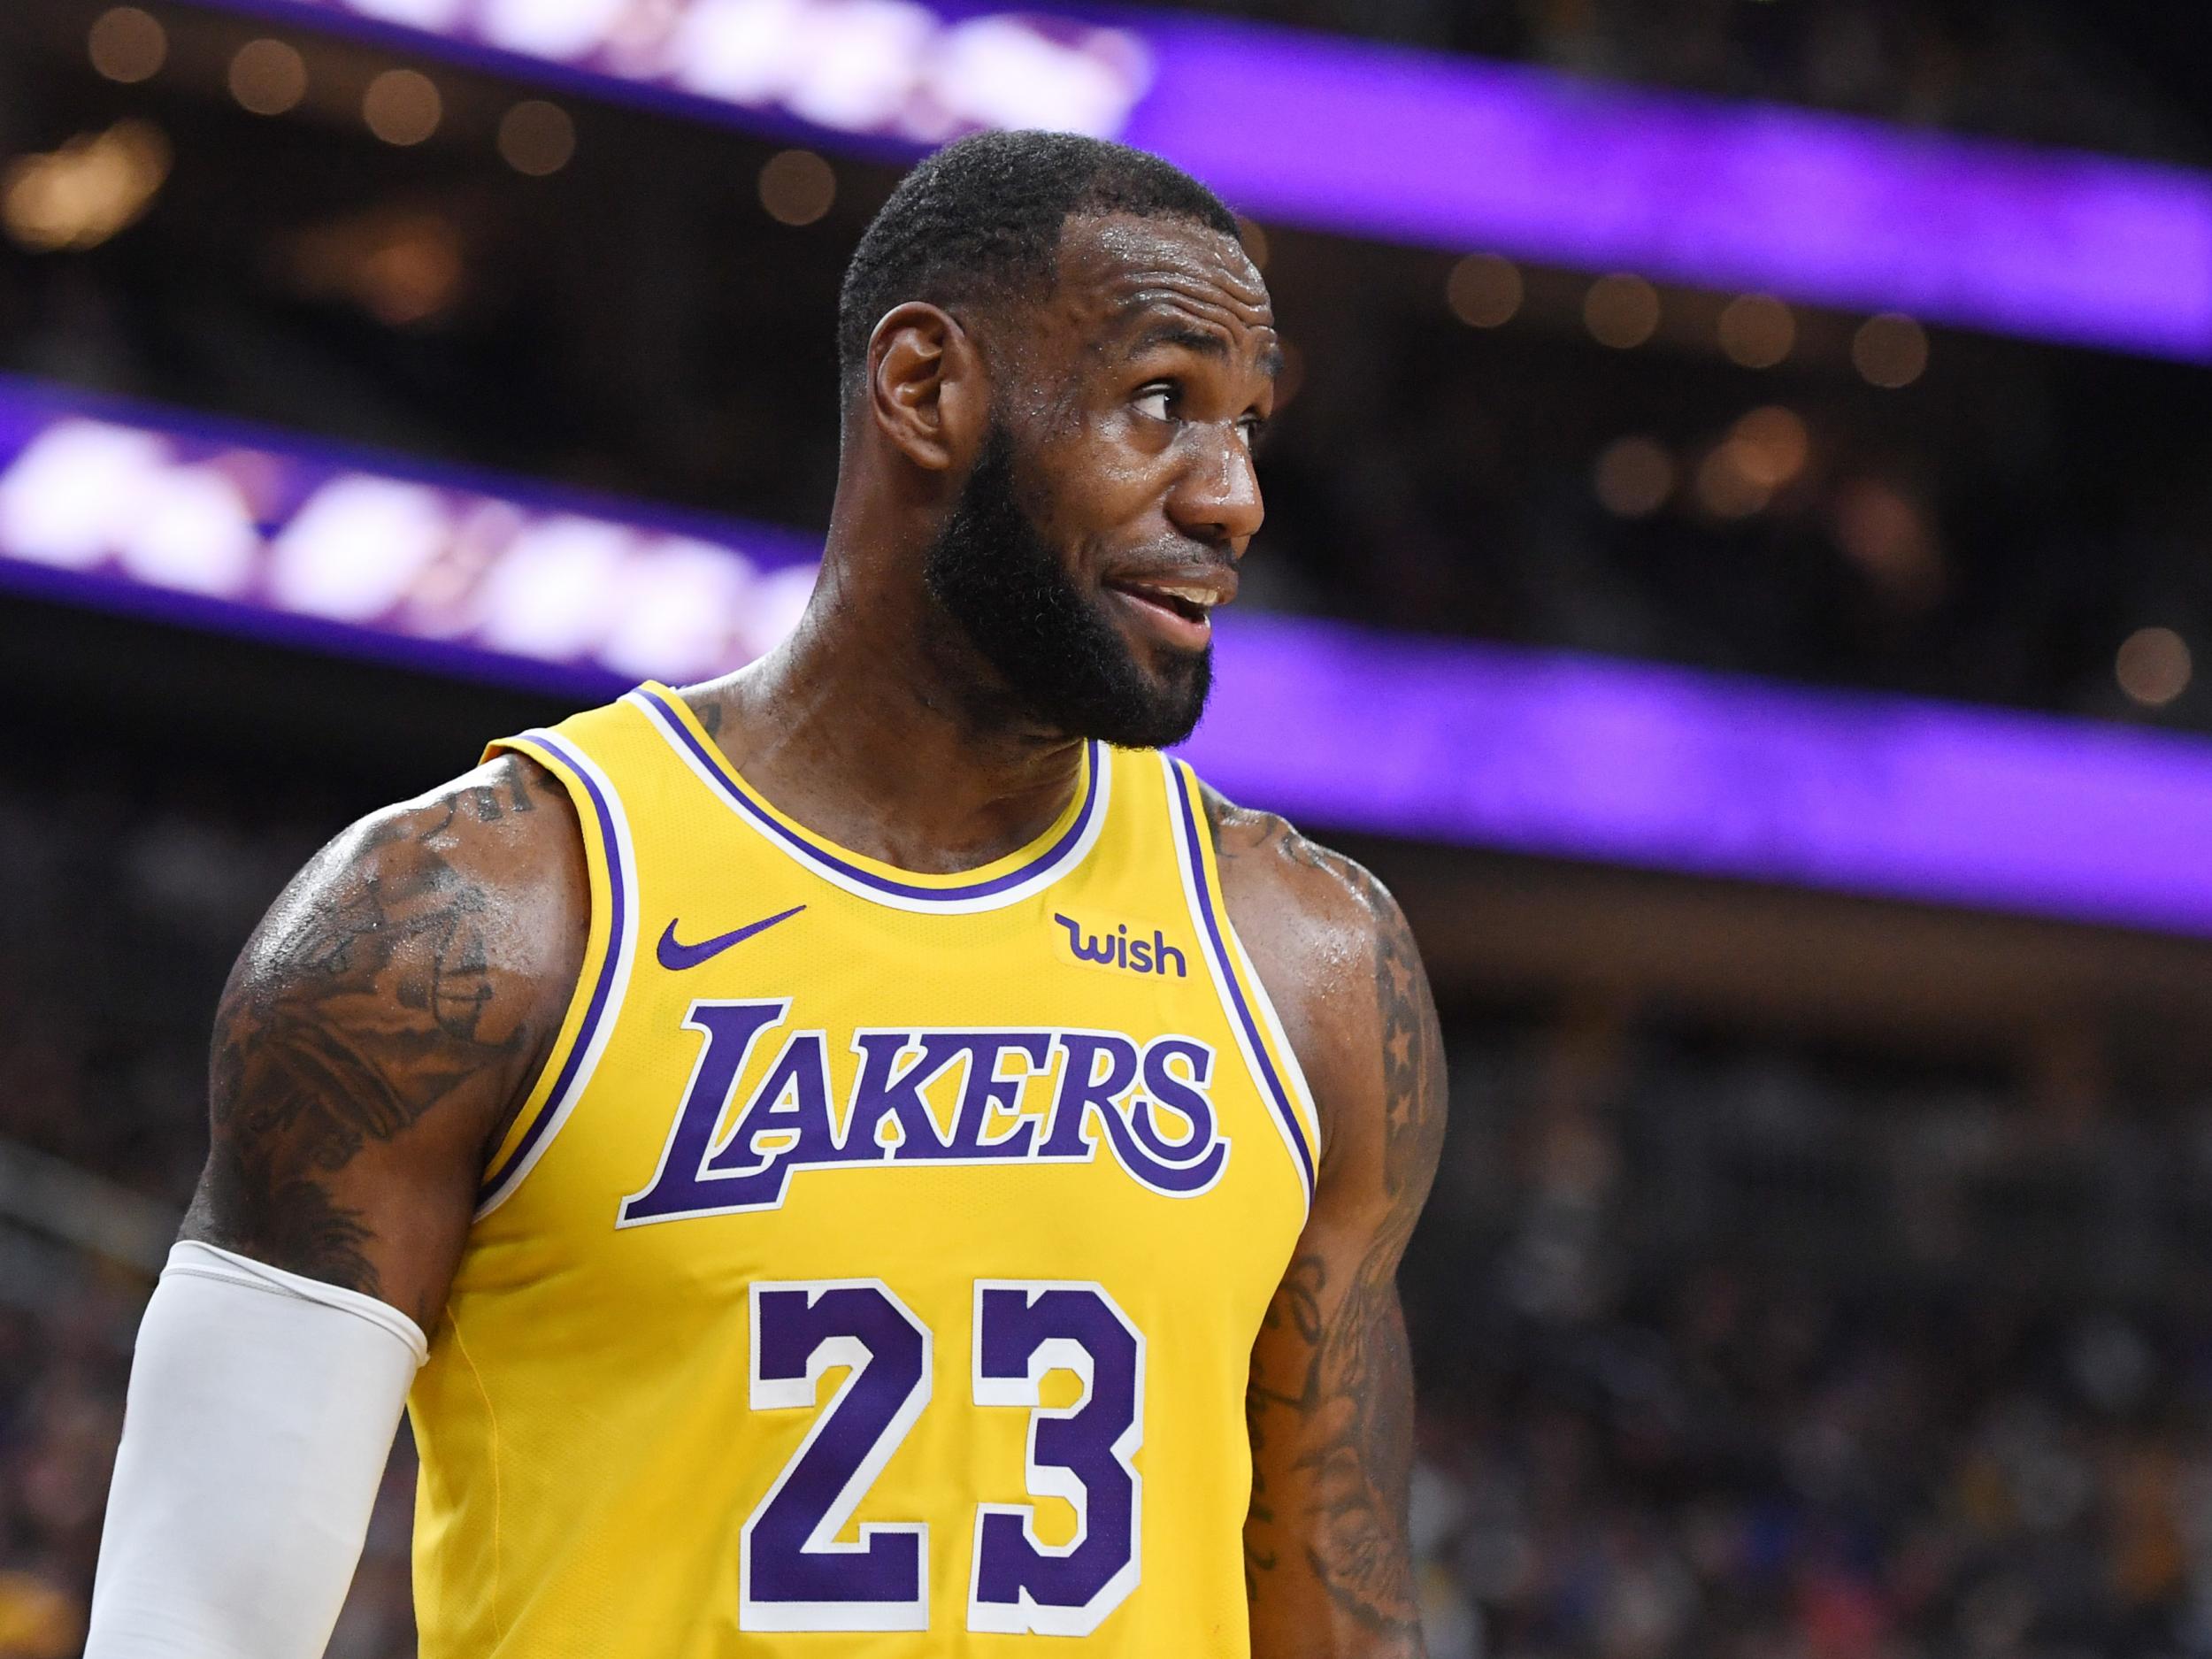 The Los Angeles Lakers and LeBron James are unlikely to make life uncomfortable for Golden State Warriors